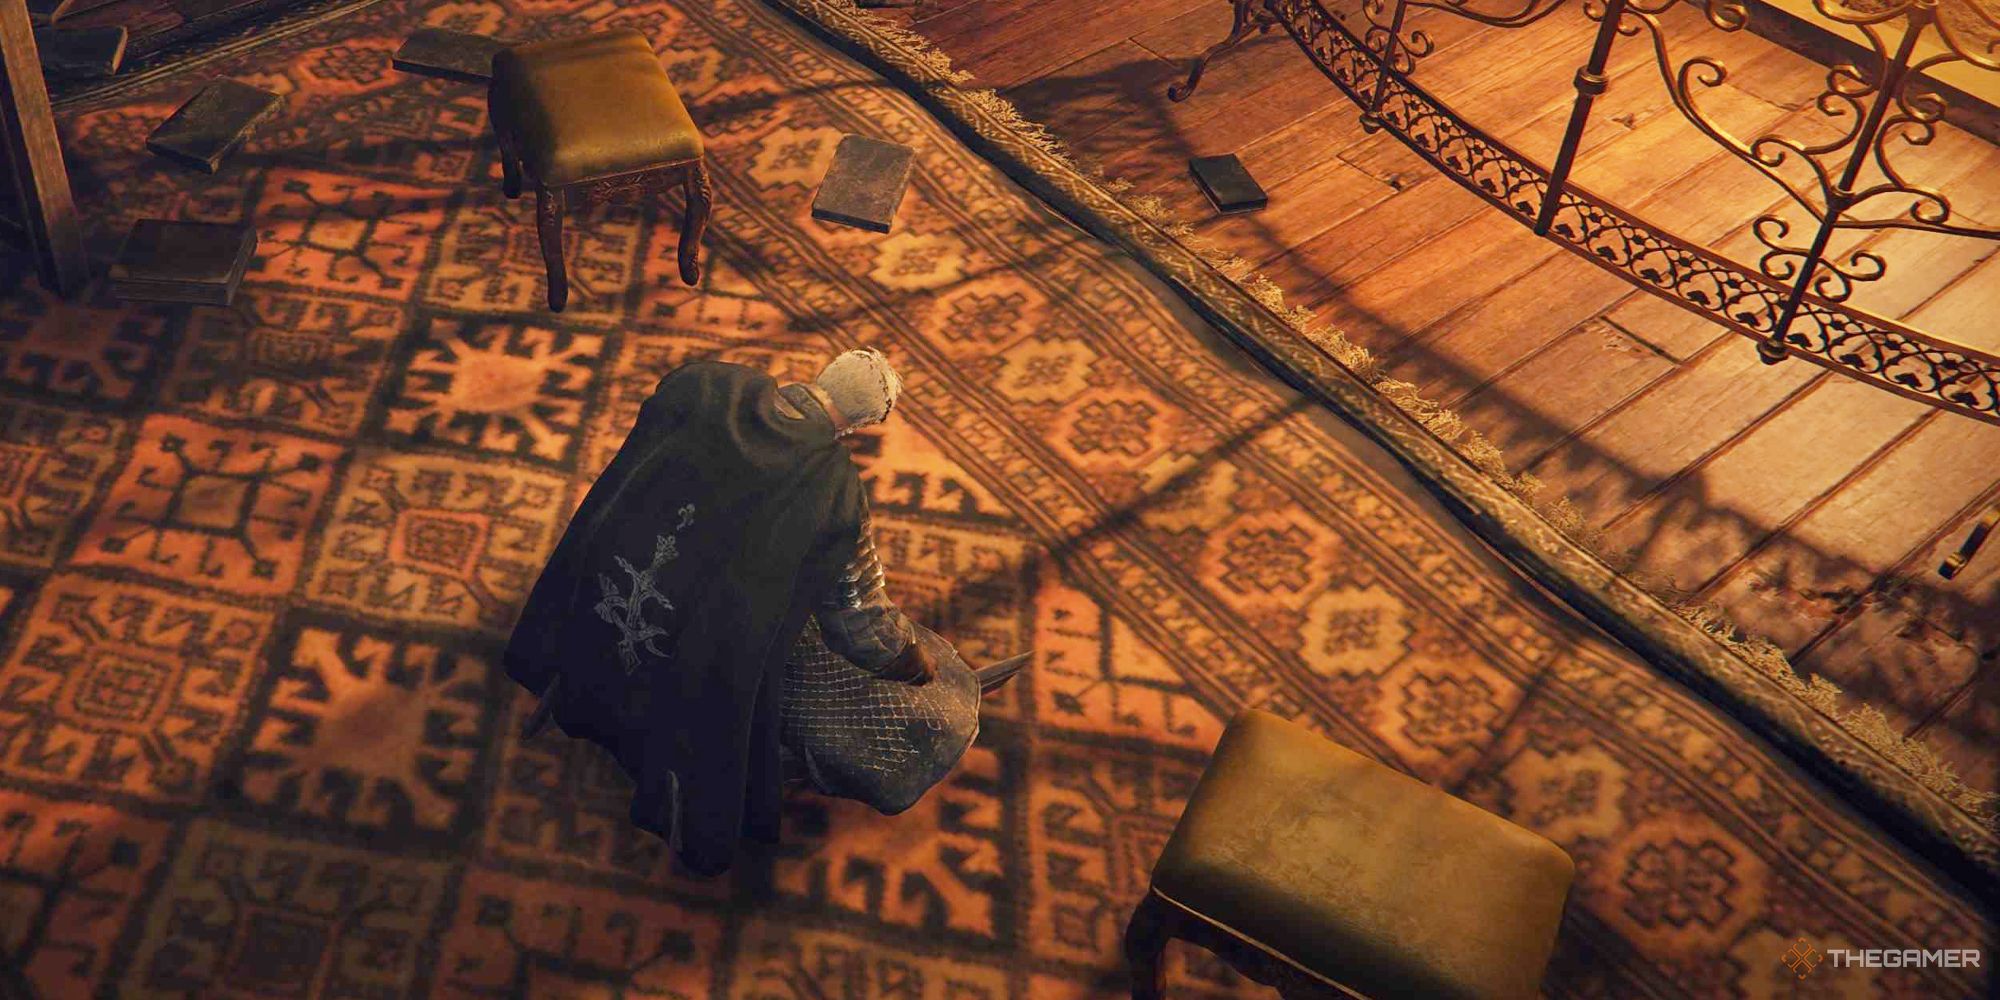 Elden Ring character meditating by a fire place on a patterned rug, next to two stools on either side